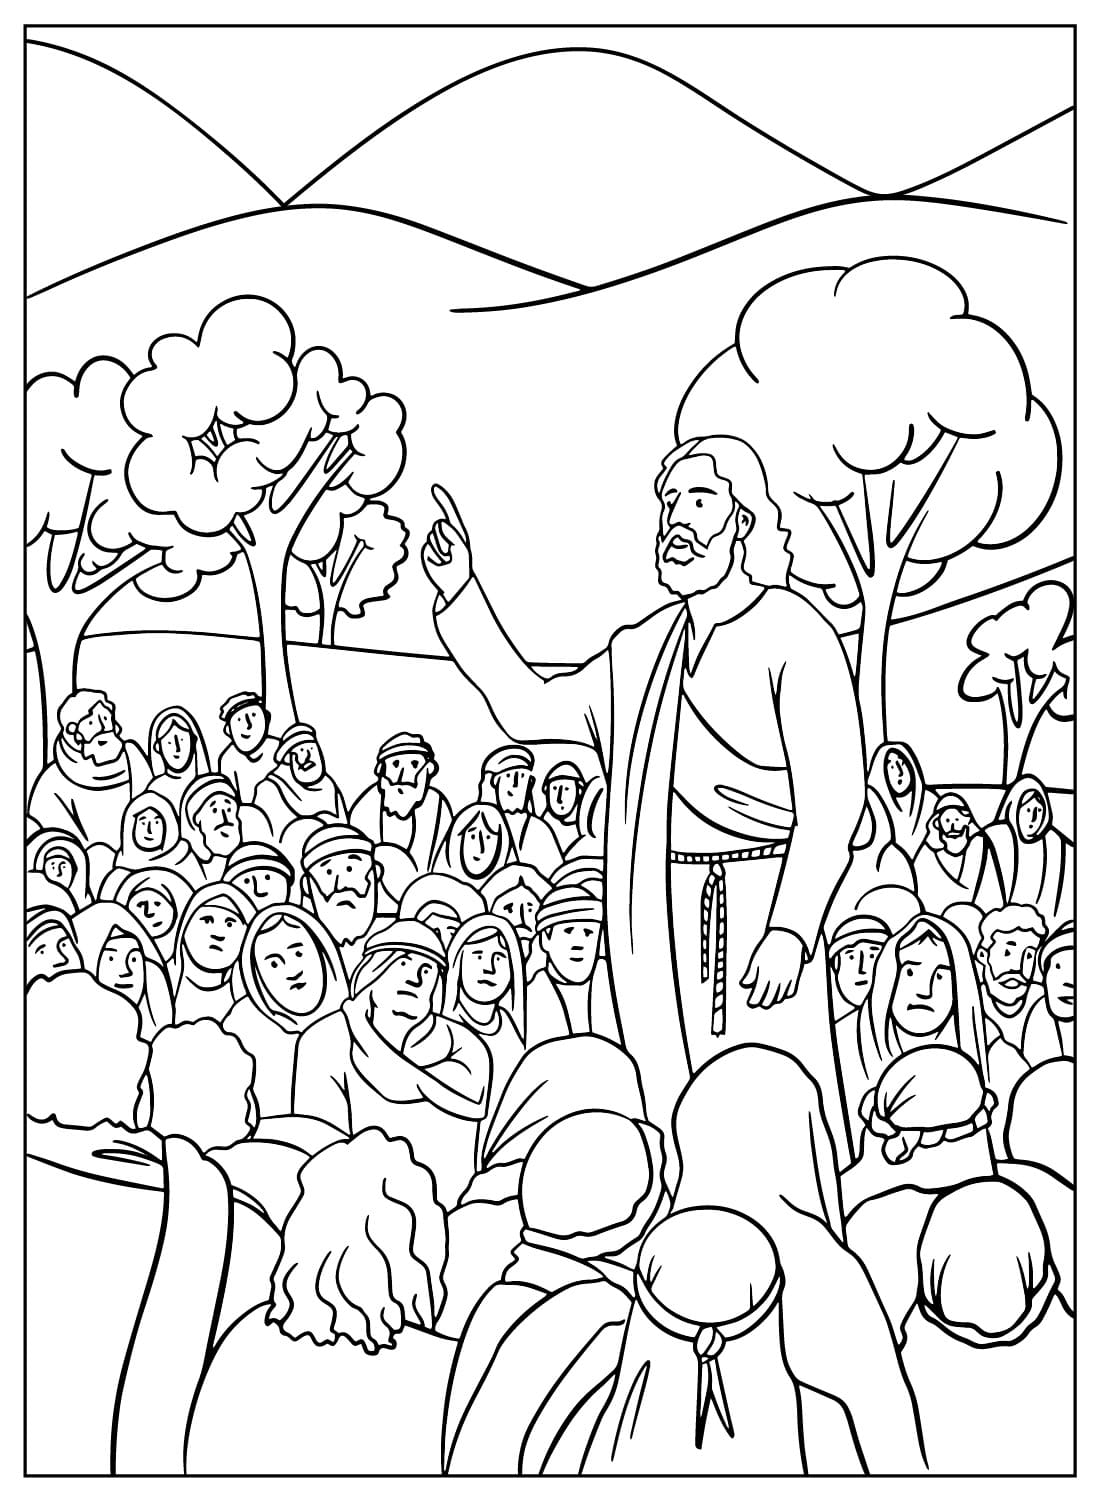 Coloring Page The Sermon on the Mount from Jesus